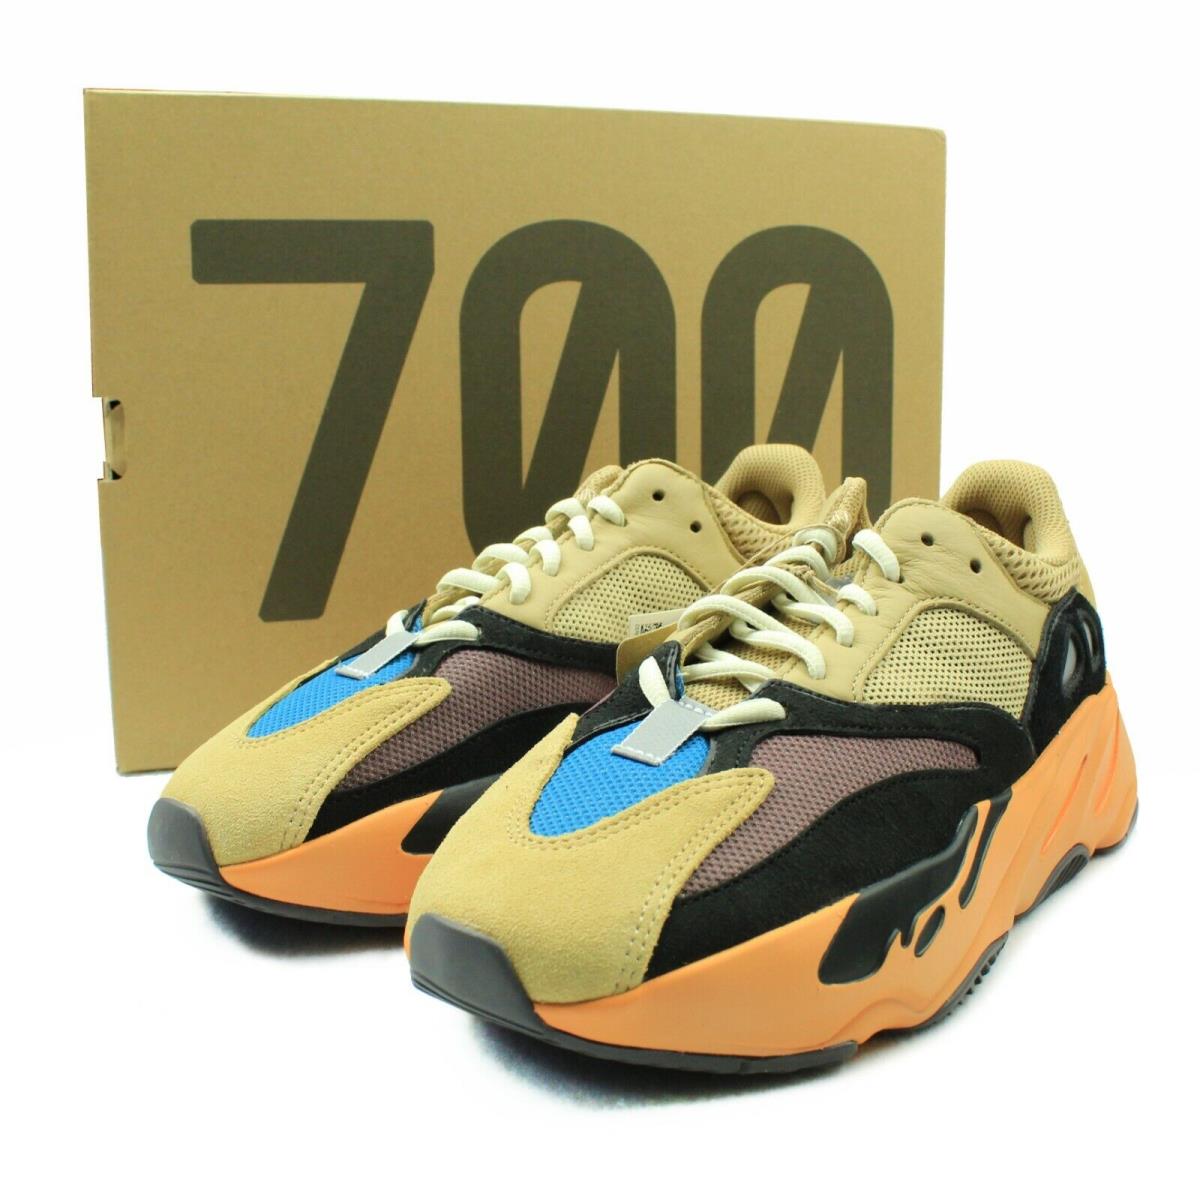 Yeezy 700 Boost Adidas Enflame Amber Ready to Ship GW0297 Shoes Size 8